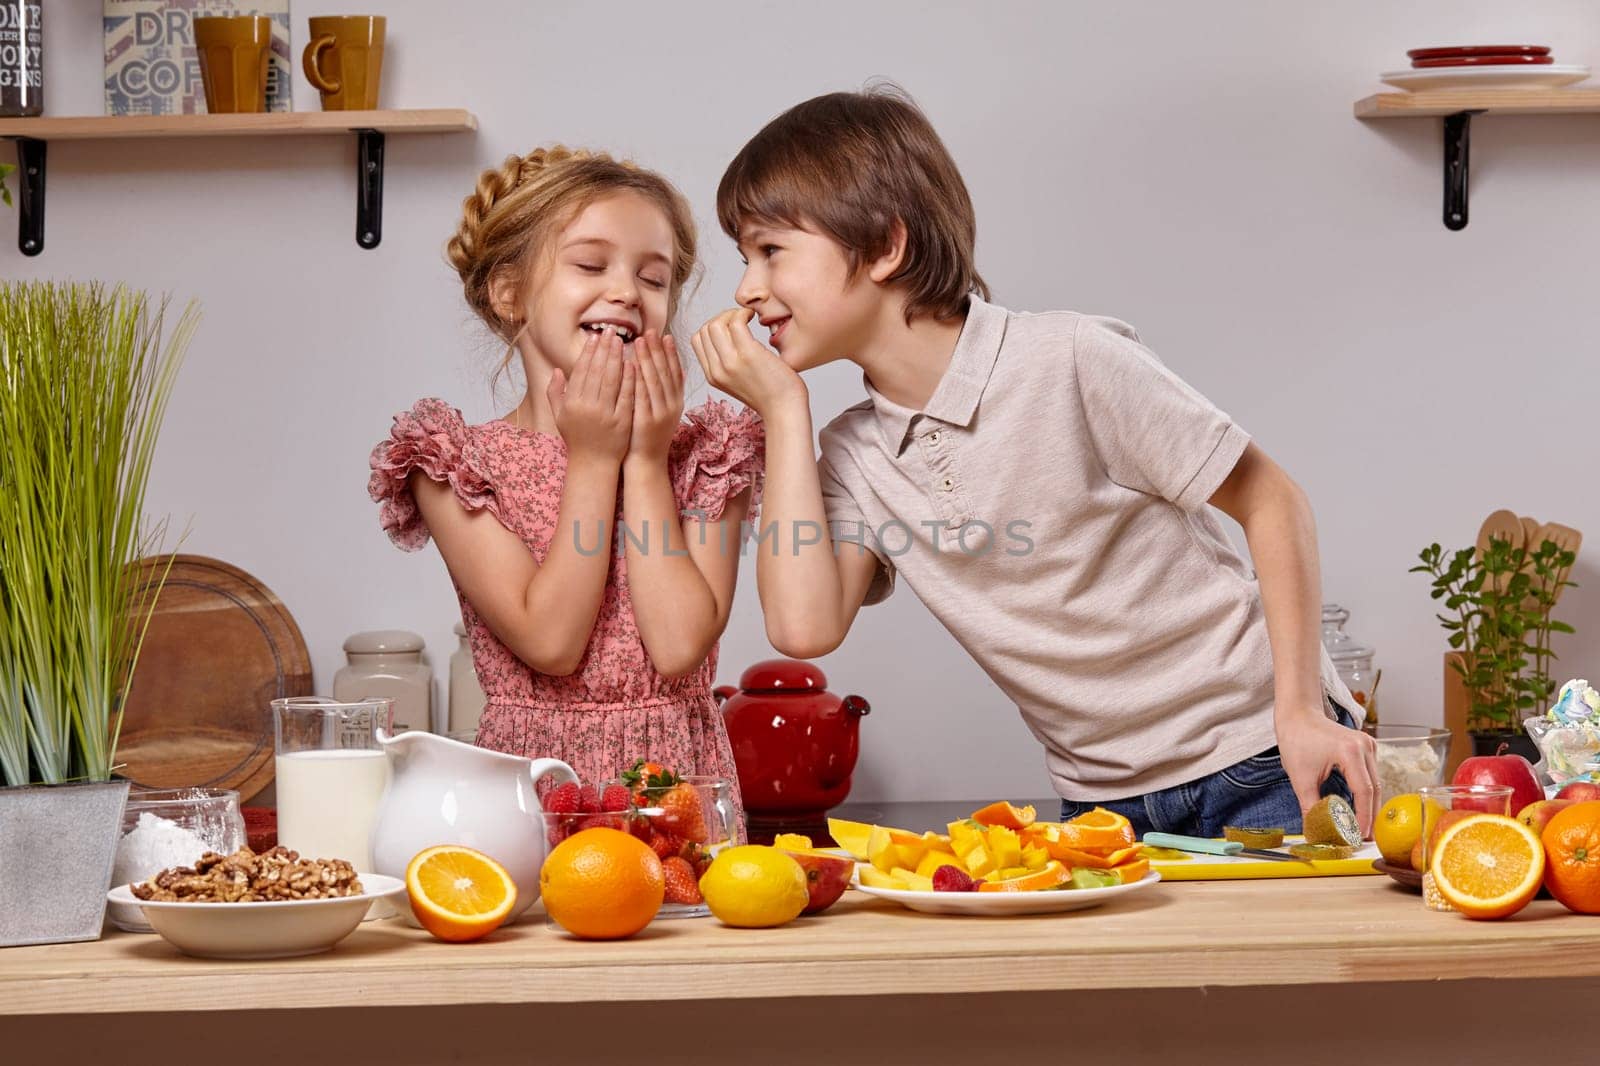 Cute cook couple. Pretty boy with brown hair dressed in a light t-shirt and jeans with a good-looking little girl dressed in a pink dress with a braid in her hairstyle are at a kitchen against a white wall with shelves on it. Boy is whispering something in a girl ear and she is laughing.